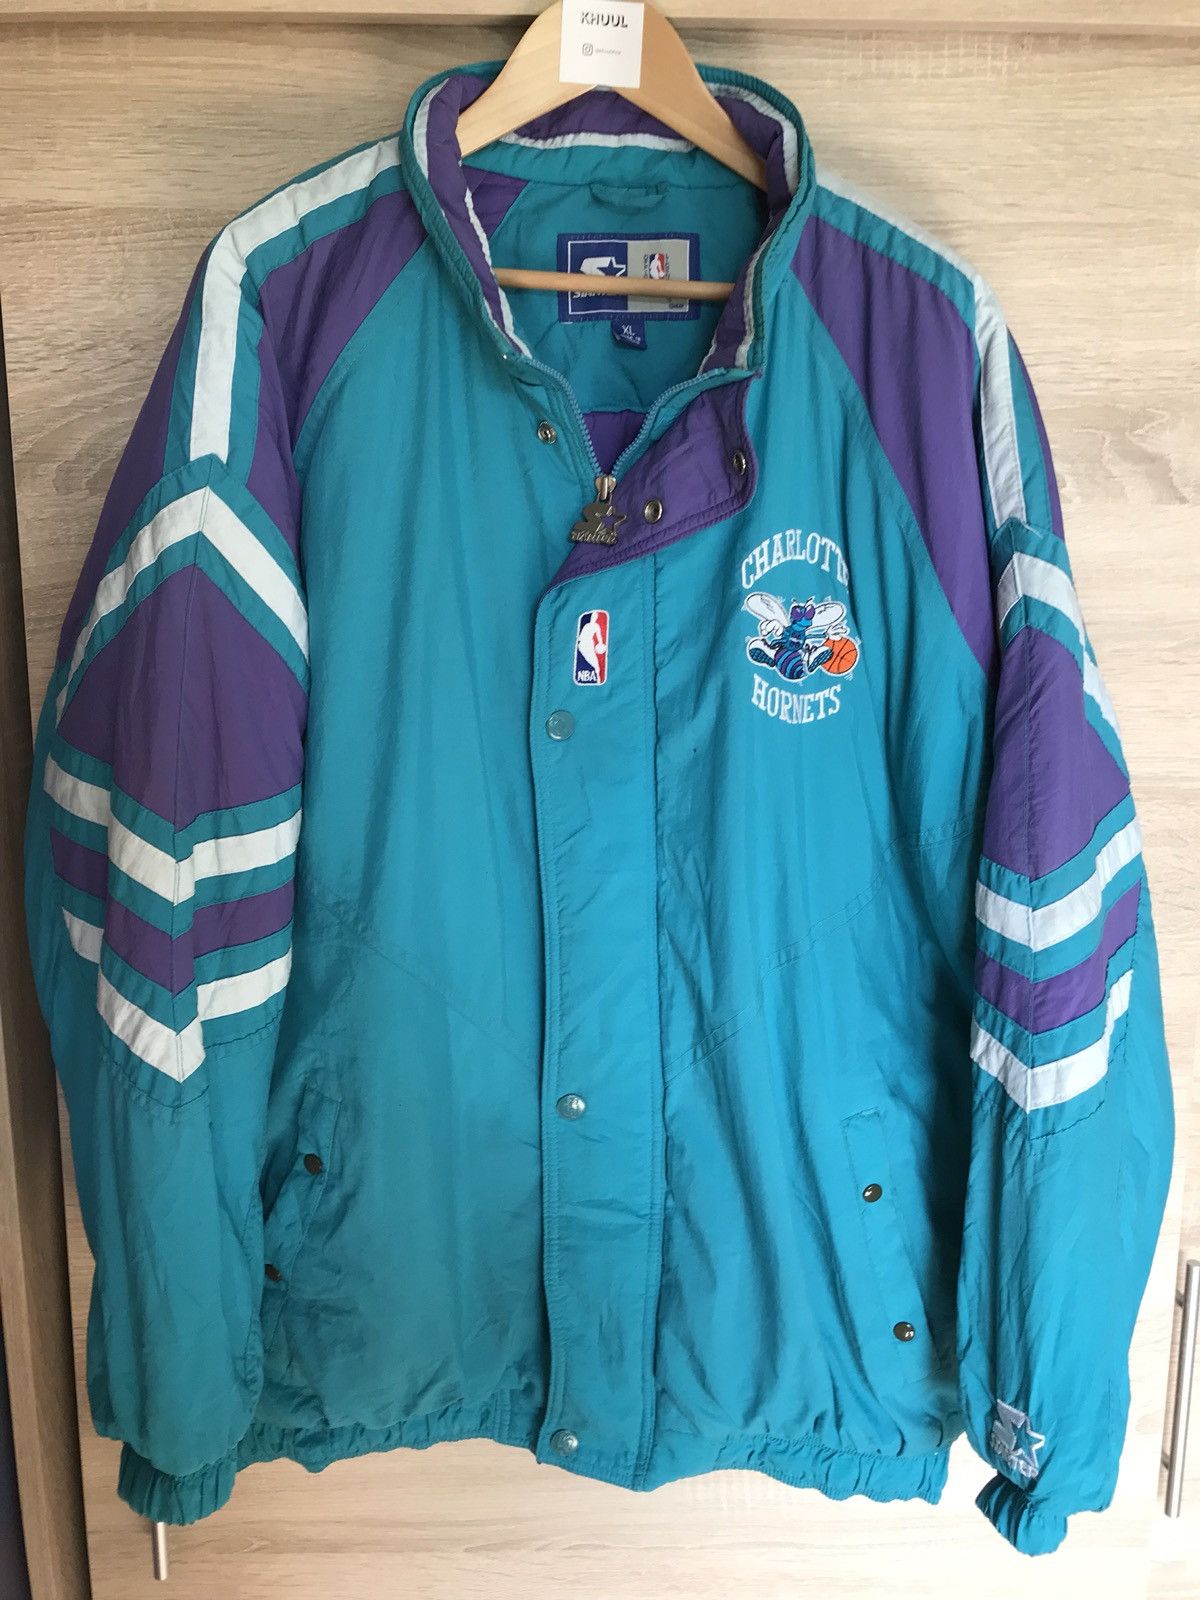 Vintage Vintage Charlotte Hornets Jacket NBA Embroidery Puffer Size US XL / EU 56 / 4 - 1 Preview